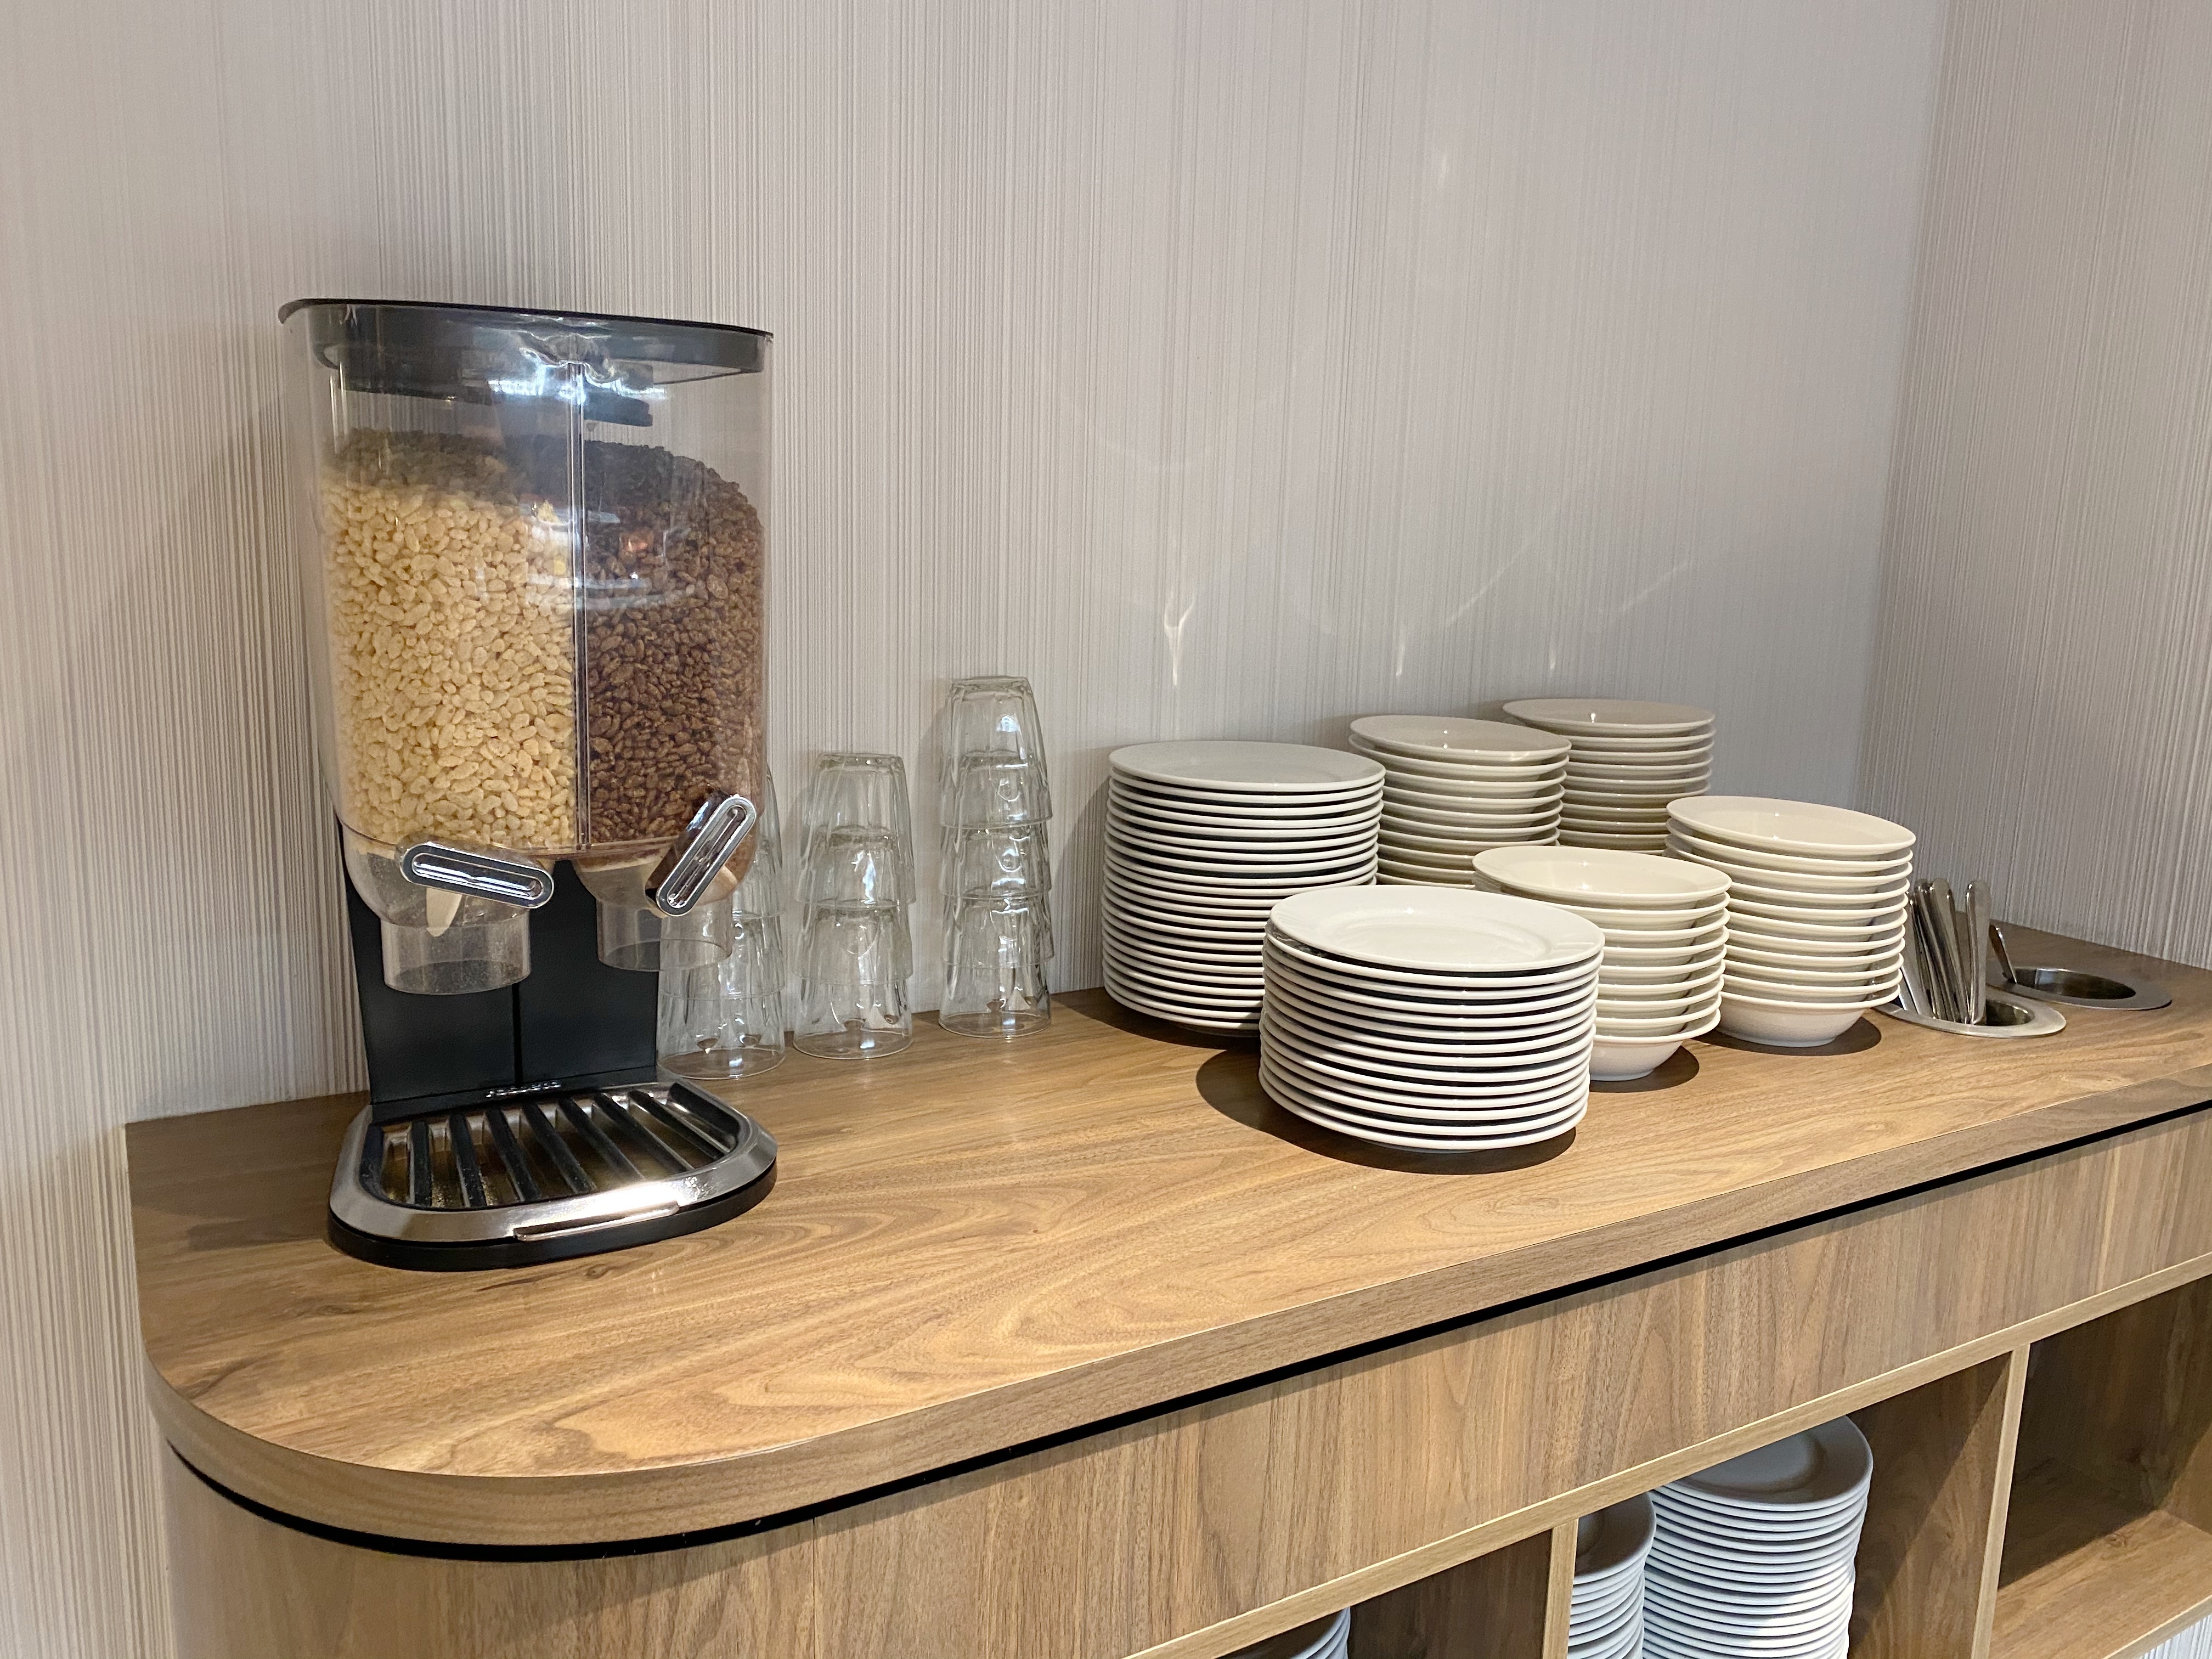 a dispenser with cereals and plates on a counter